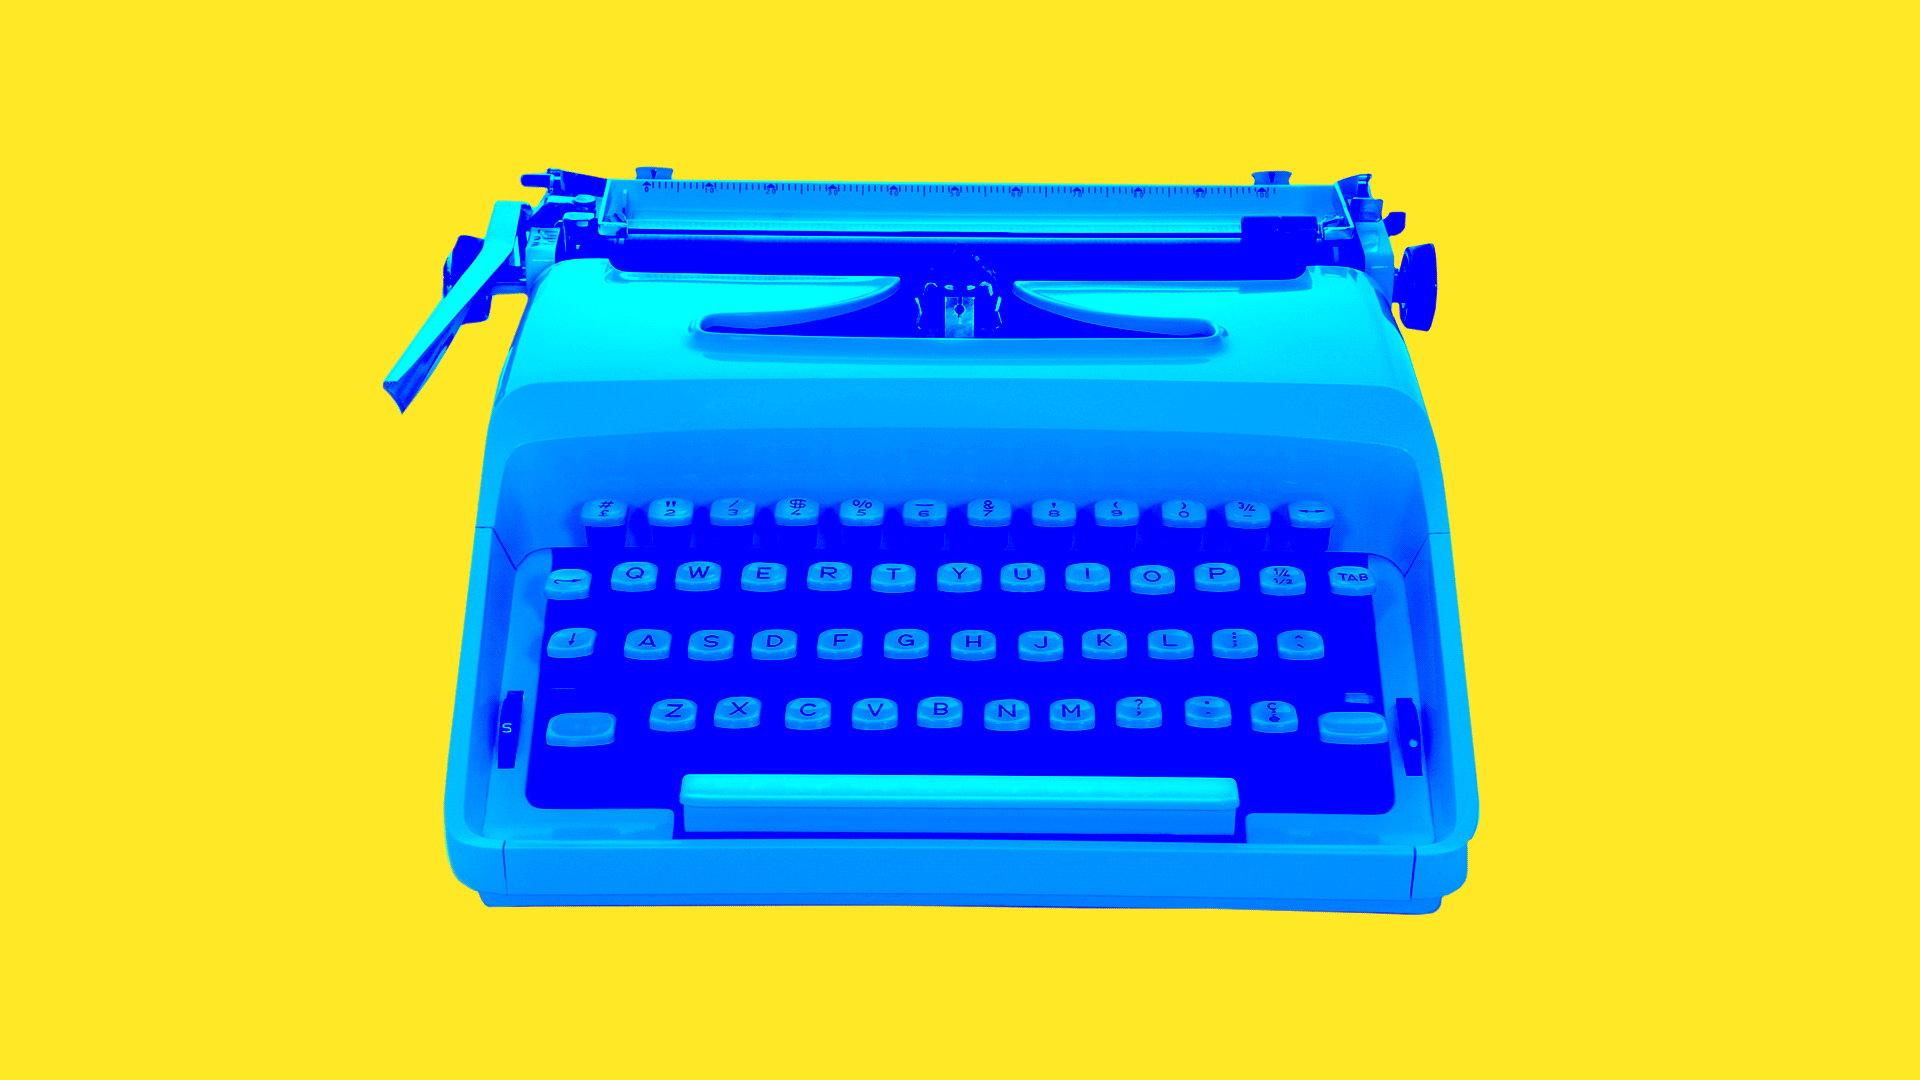 Illustration of a typewriter typing on its own